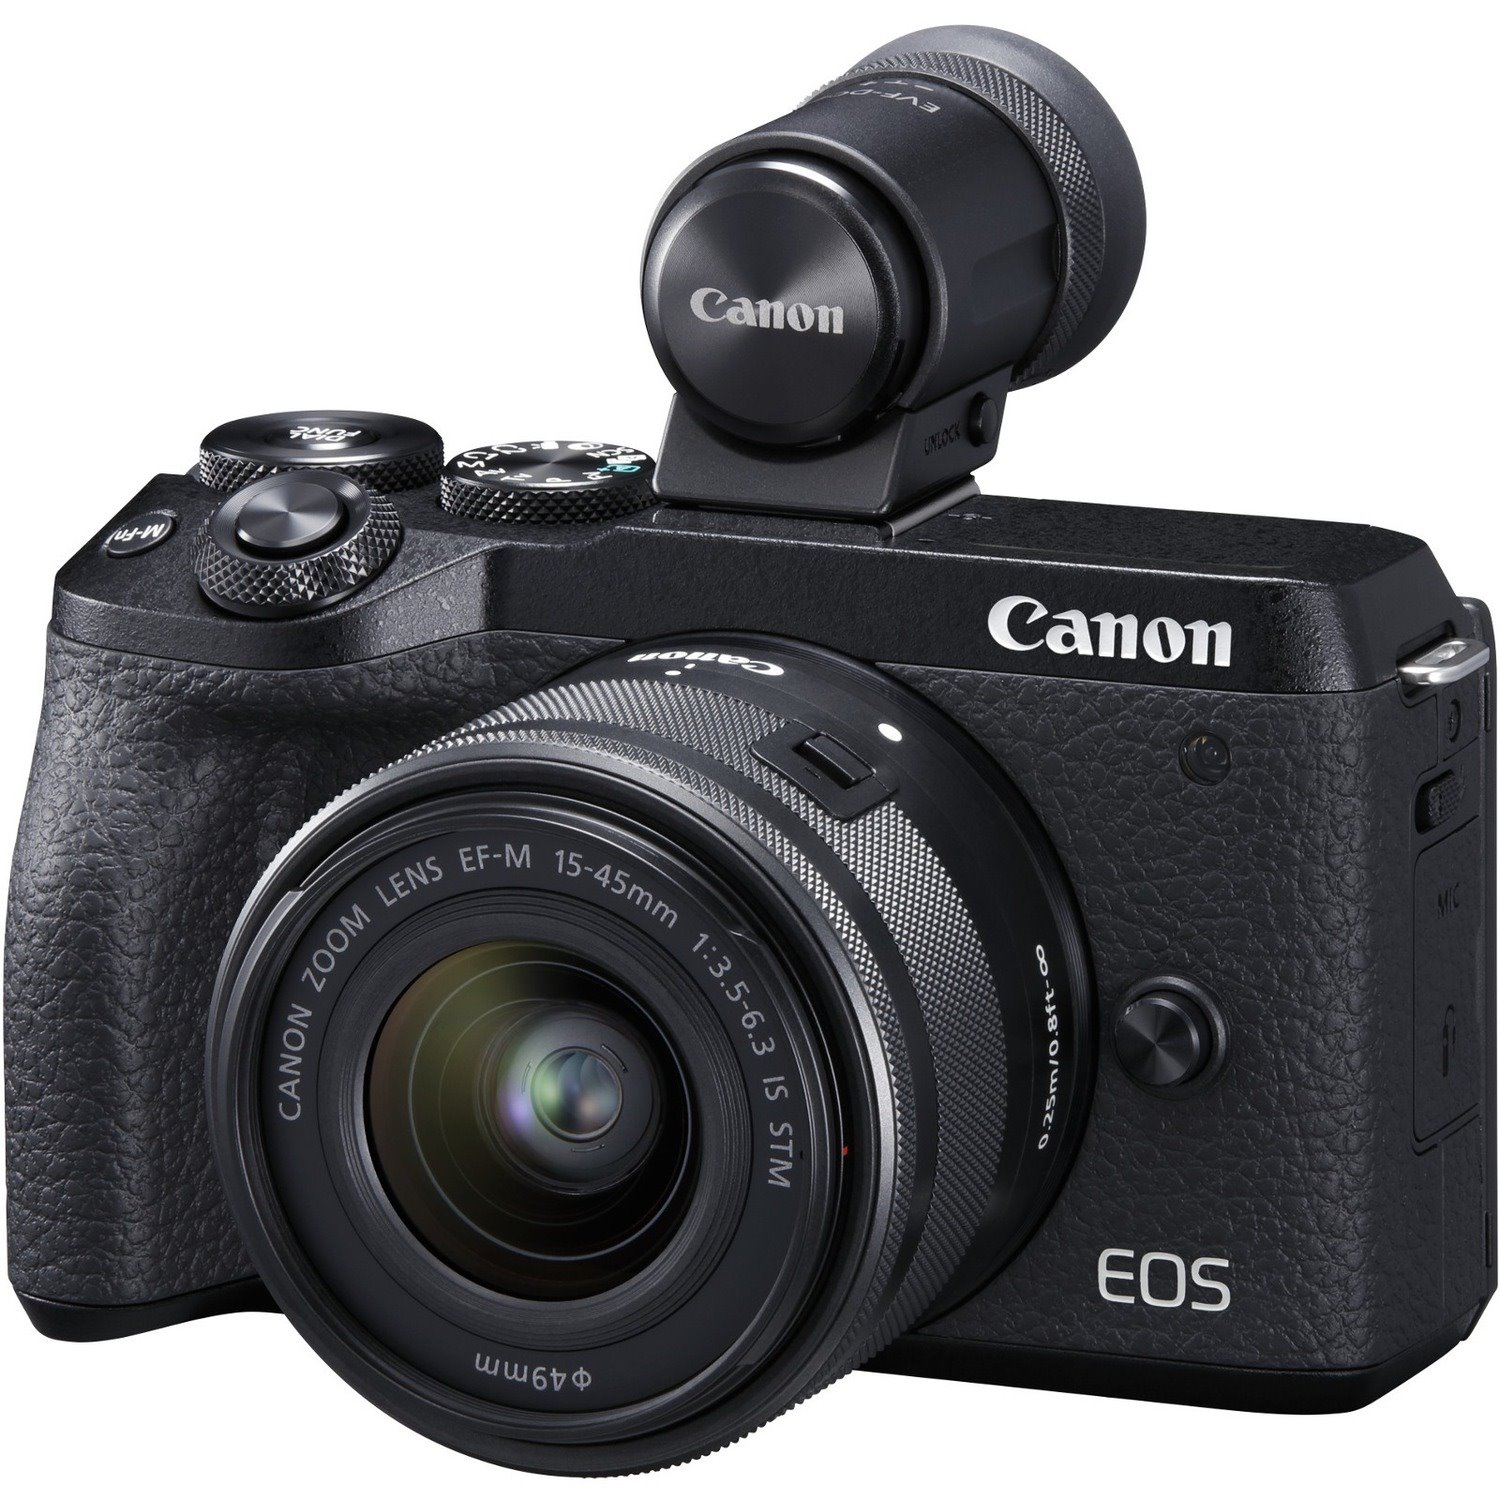 Canon EOS M6 Mark II 32.5 Megapixel Mirrorless Camera with Lens - 15 mm - 45 mm